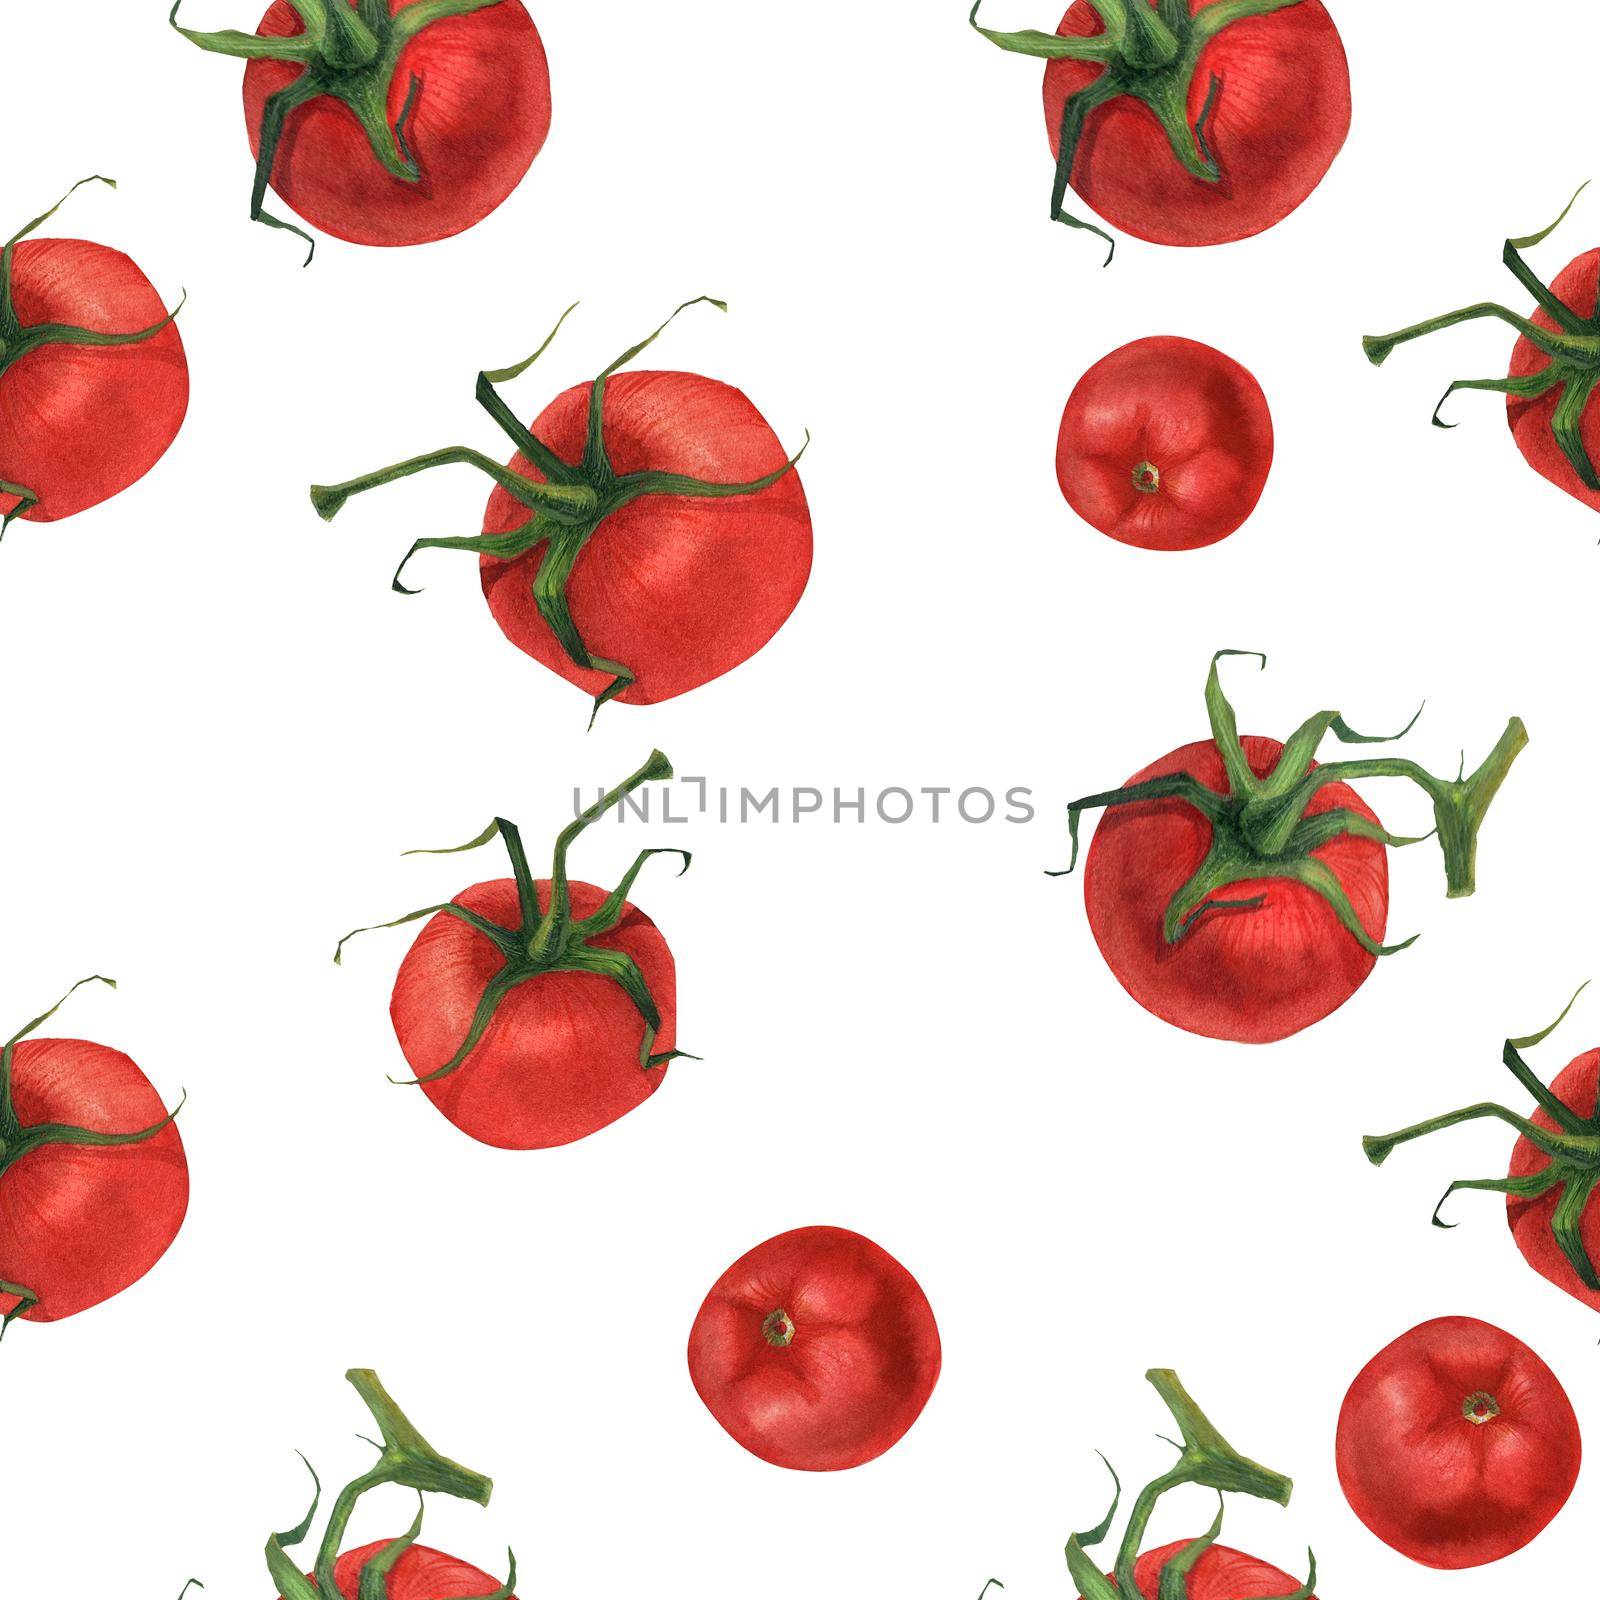 Vegan watercolor seamless pattern with red tomato. White background, isolated, clipping path included